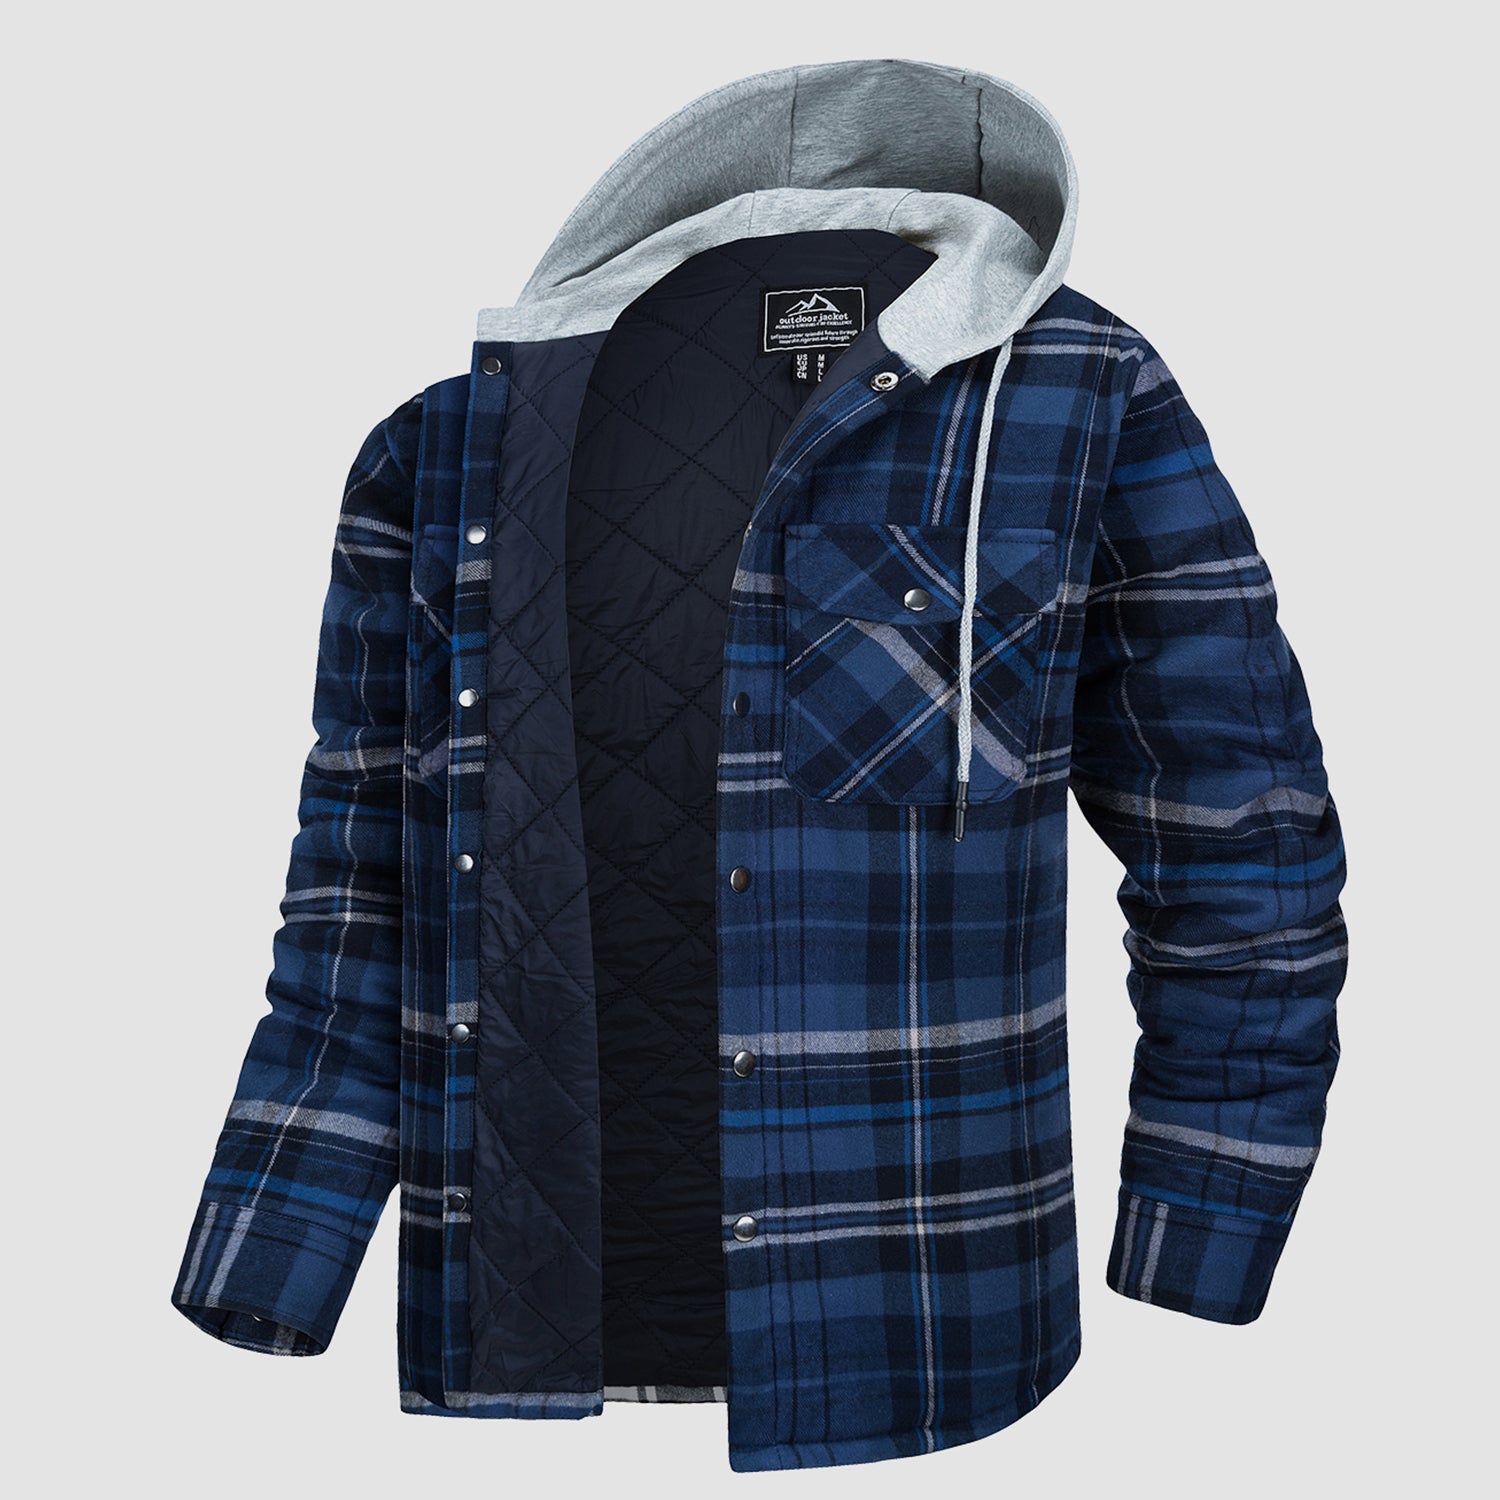 The Quilted Plaid Flannel - Red Baron